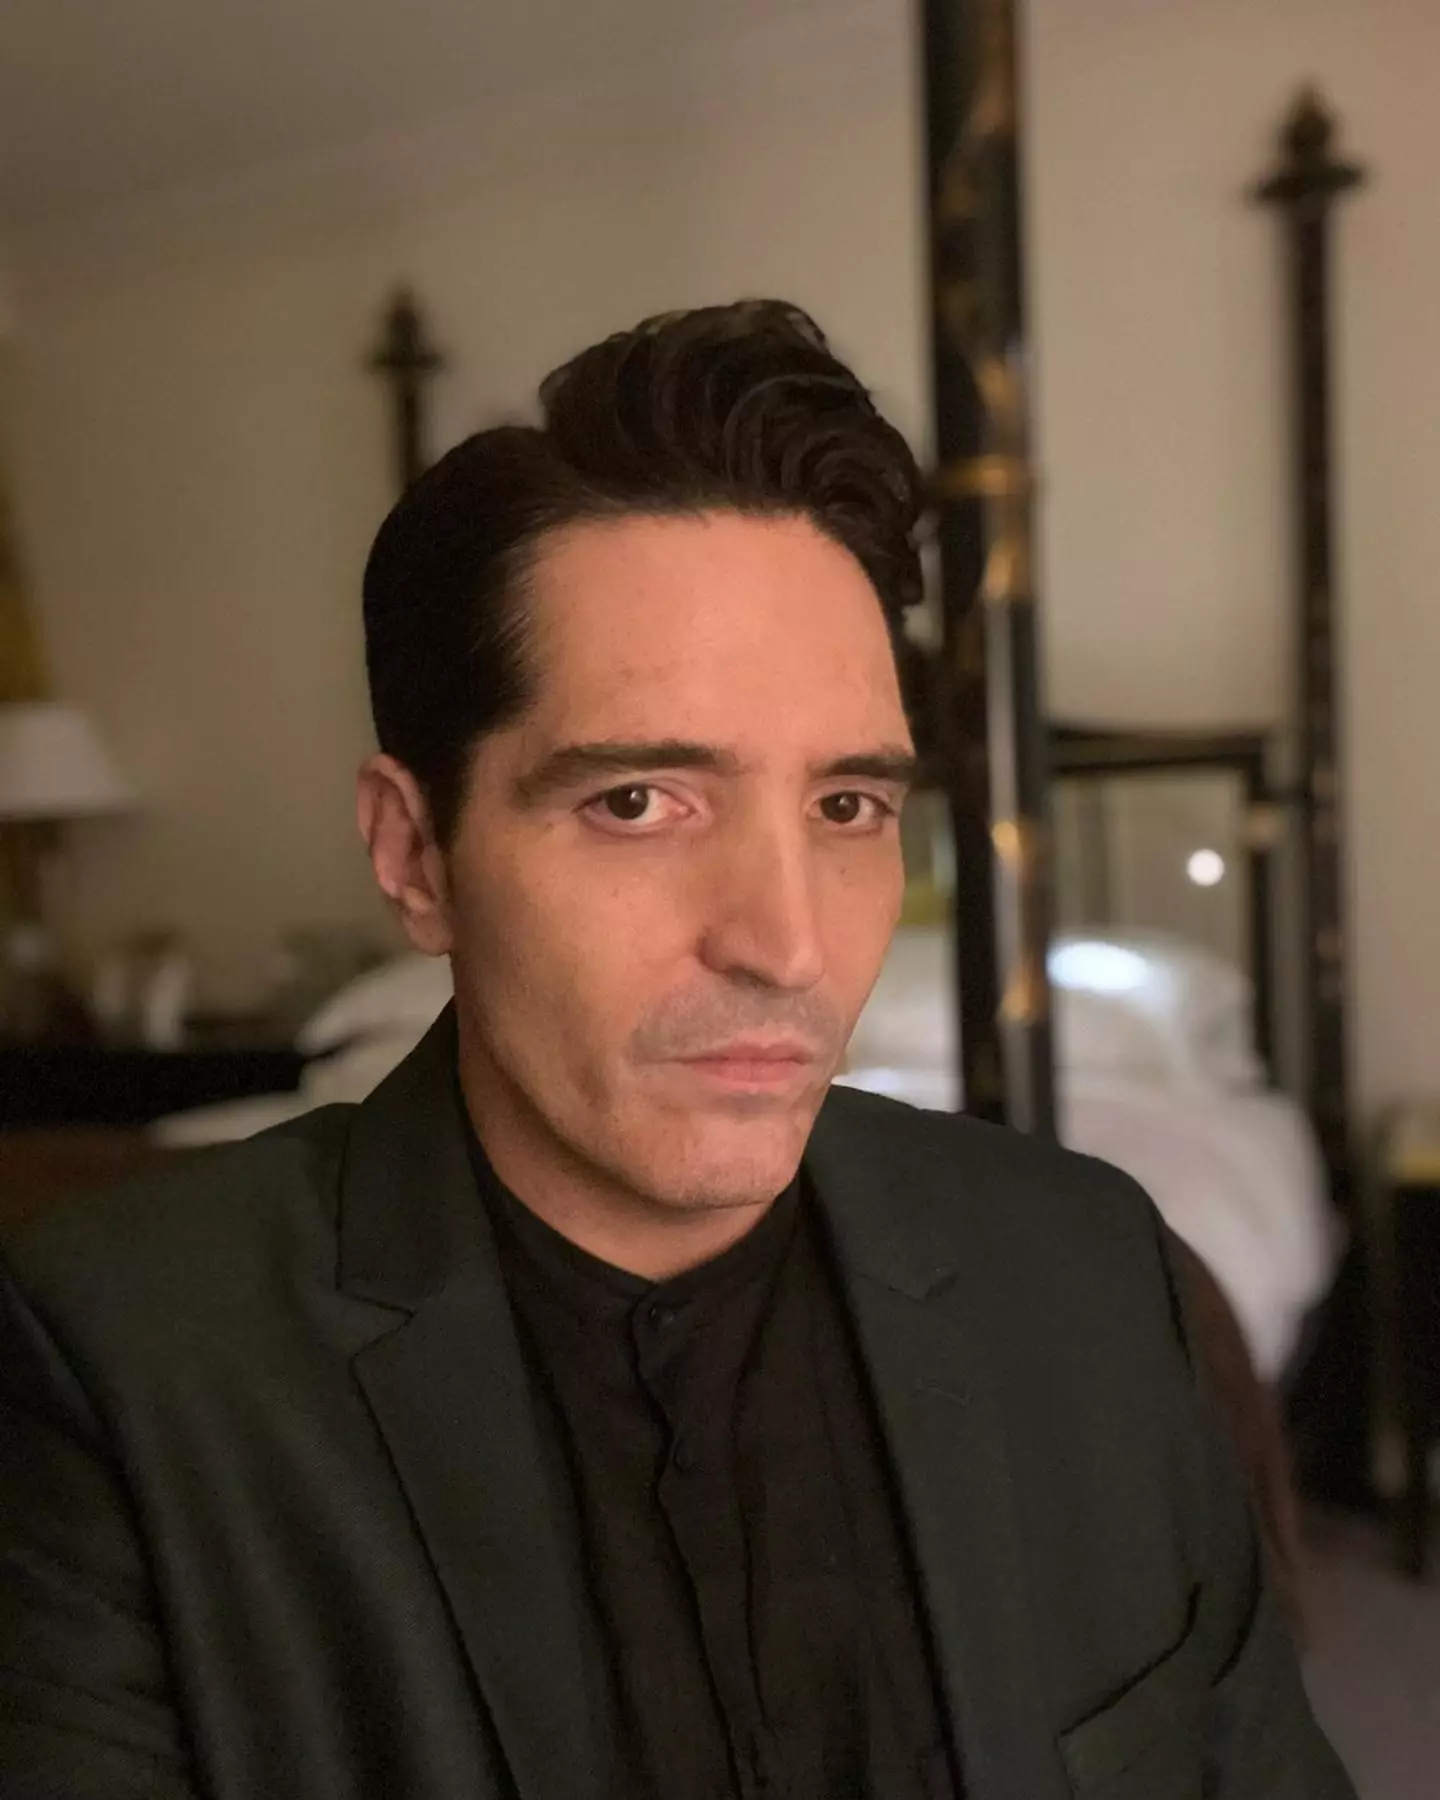 Dastmalchian's addiction spiralled while he attended DePaul University in Chicago.